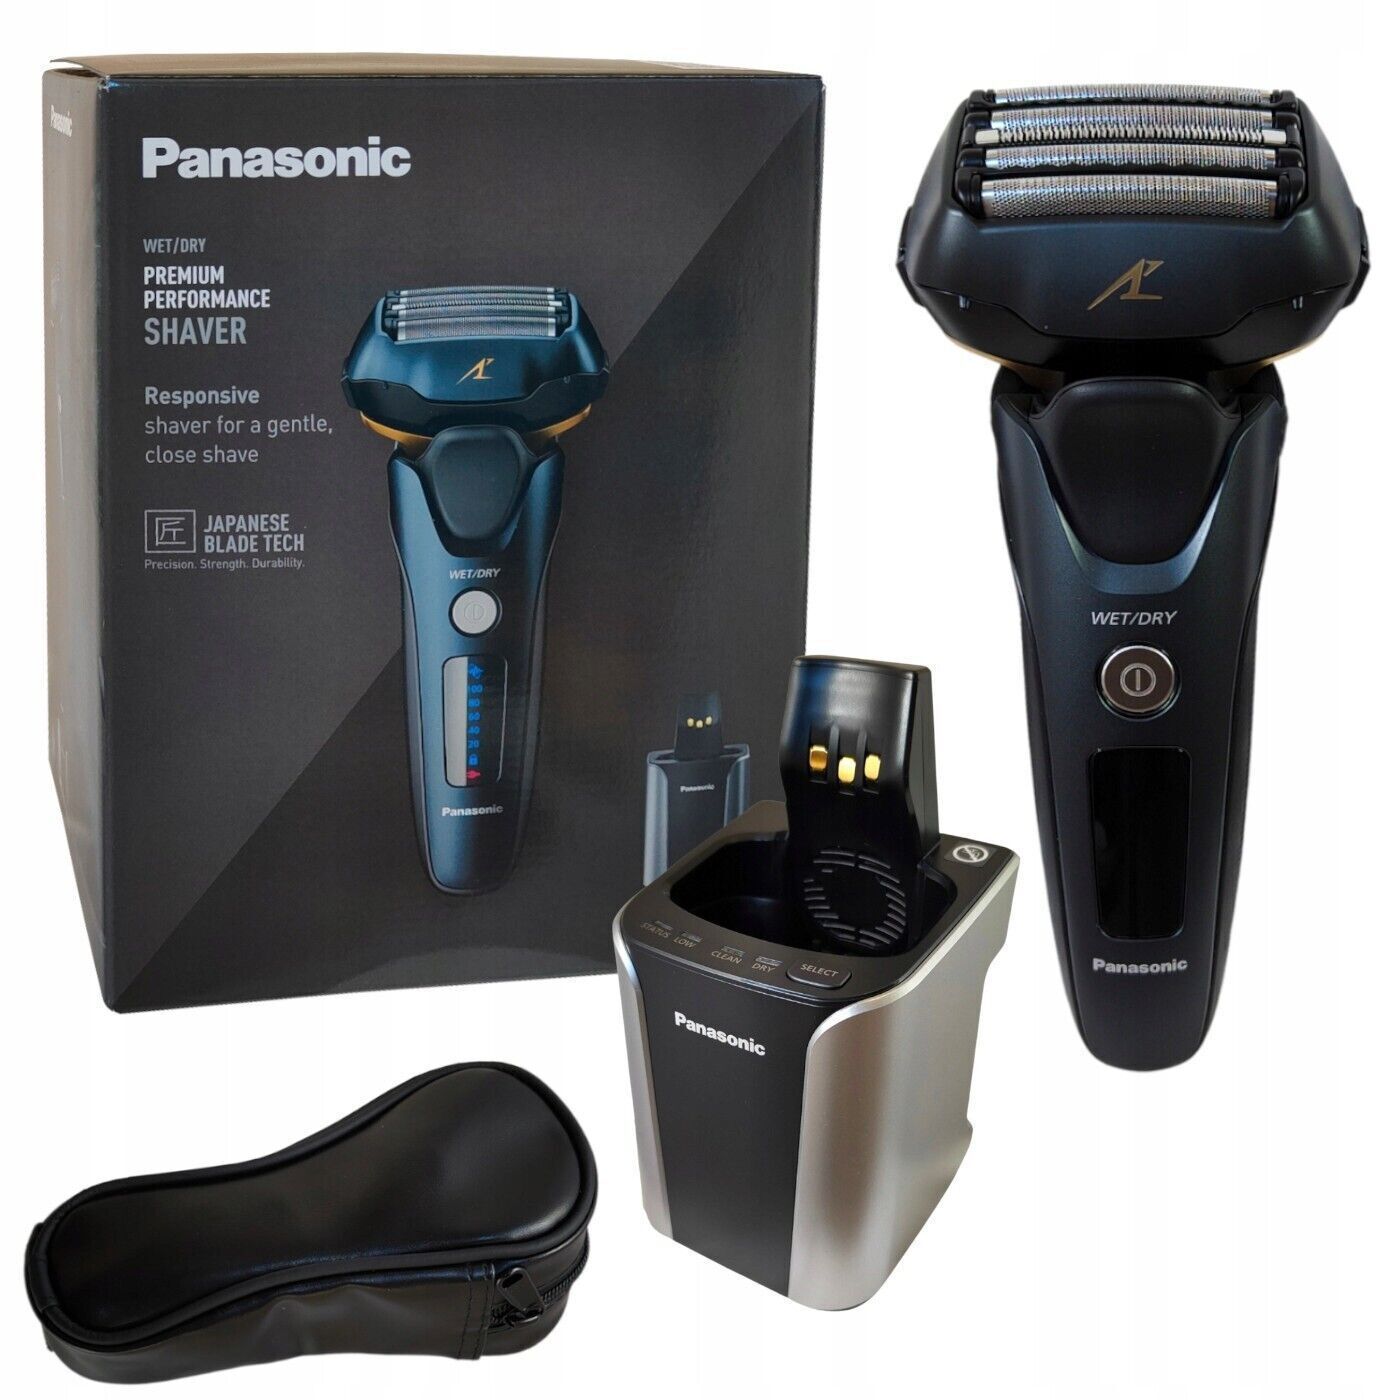 Primary image for Panasonic ES-LV97-K Razor Cordless Men's Electric Shaver Cleaning Charging Base